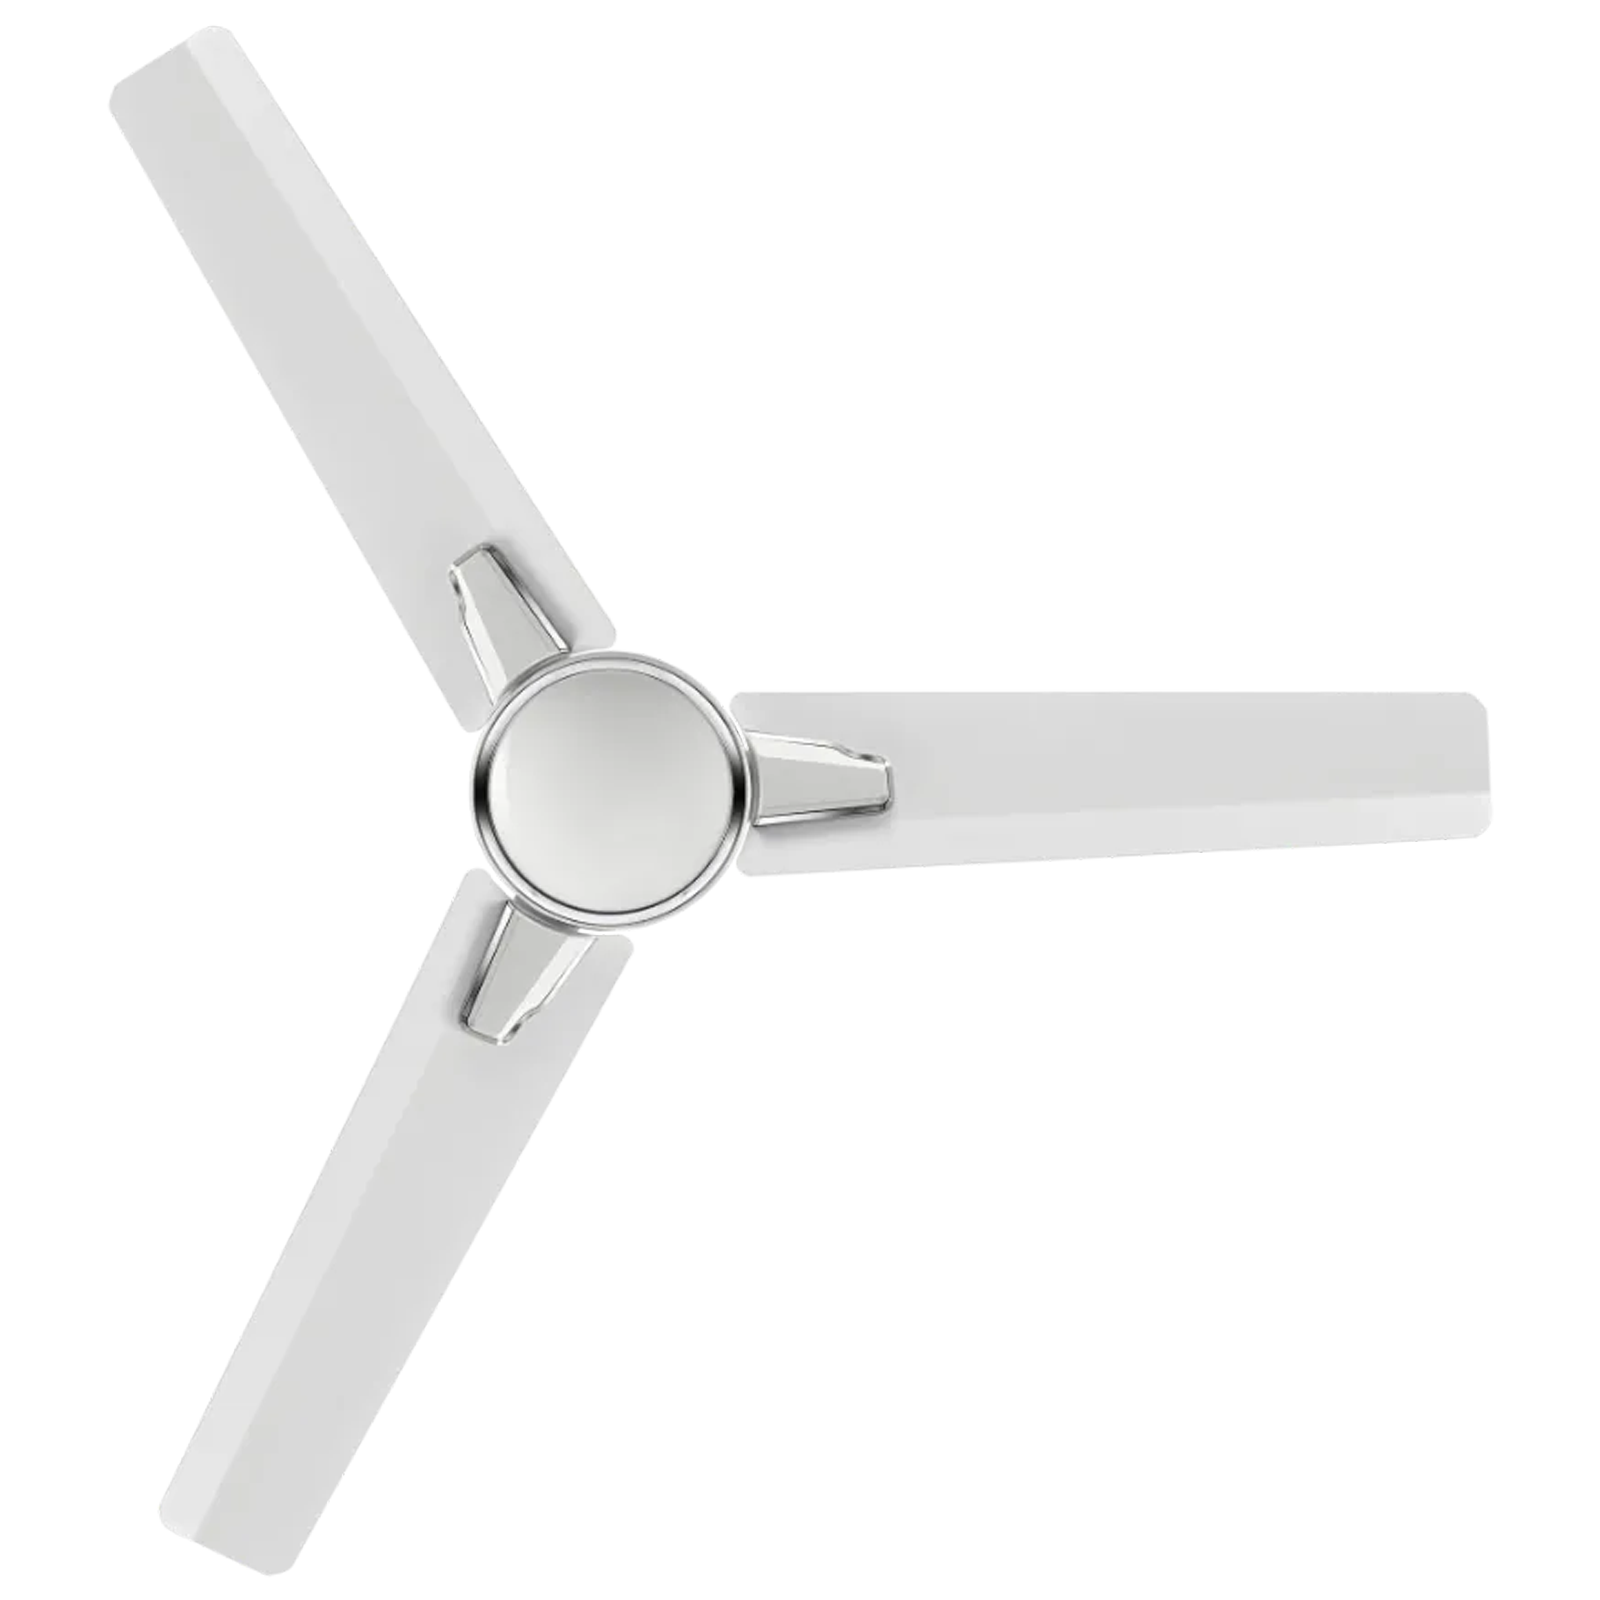 Kuhl Prima A3 120 cm Sweep 3 Blade Ceiling Fan (With BLDC Motor, 19003W, White)